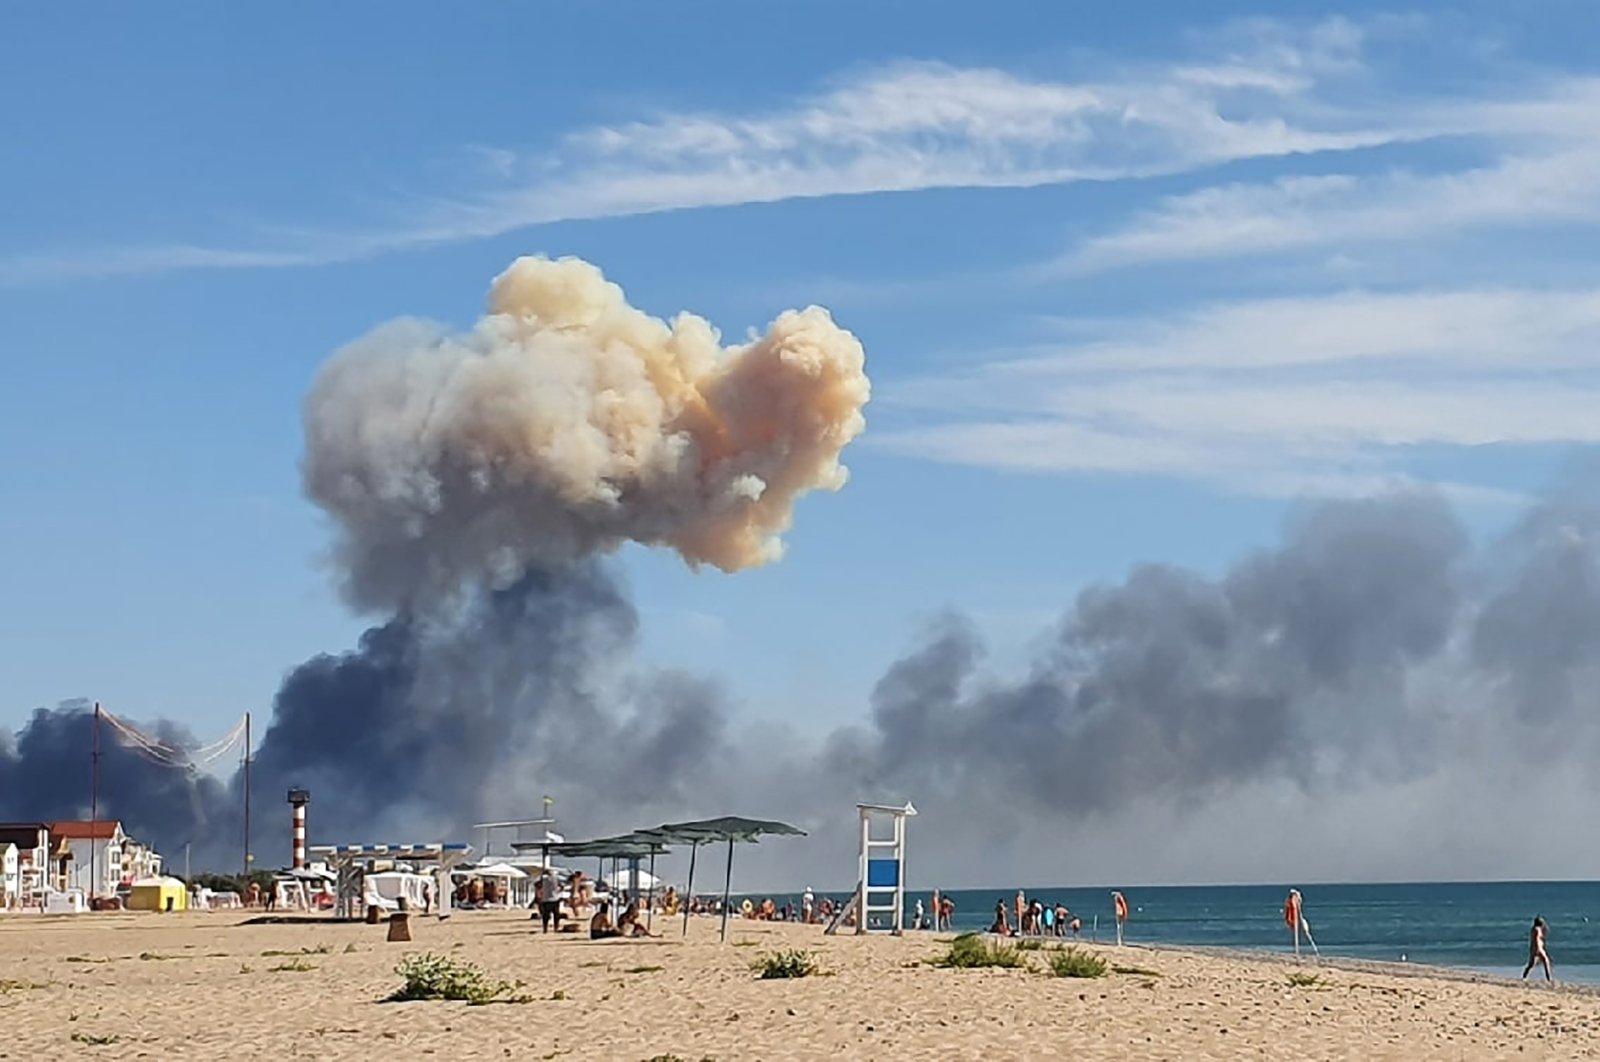 Rising smoke can be seen from the beach at Saky after explosions were heard from the direction of a Russian military airbase near Novofedorivka, Crimea, Ukraine, Aug. 9, 2022. (UGC via AP)